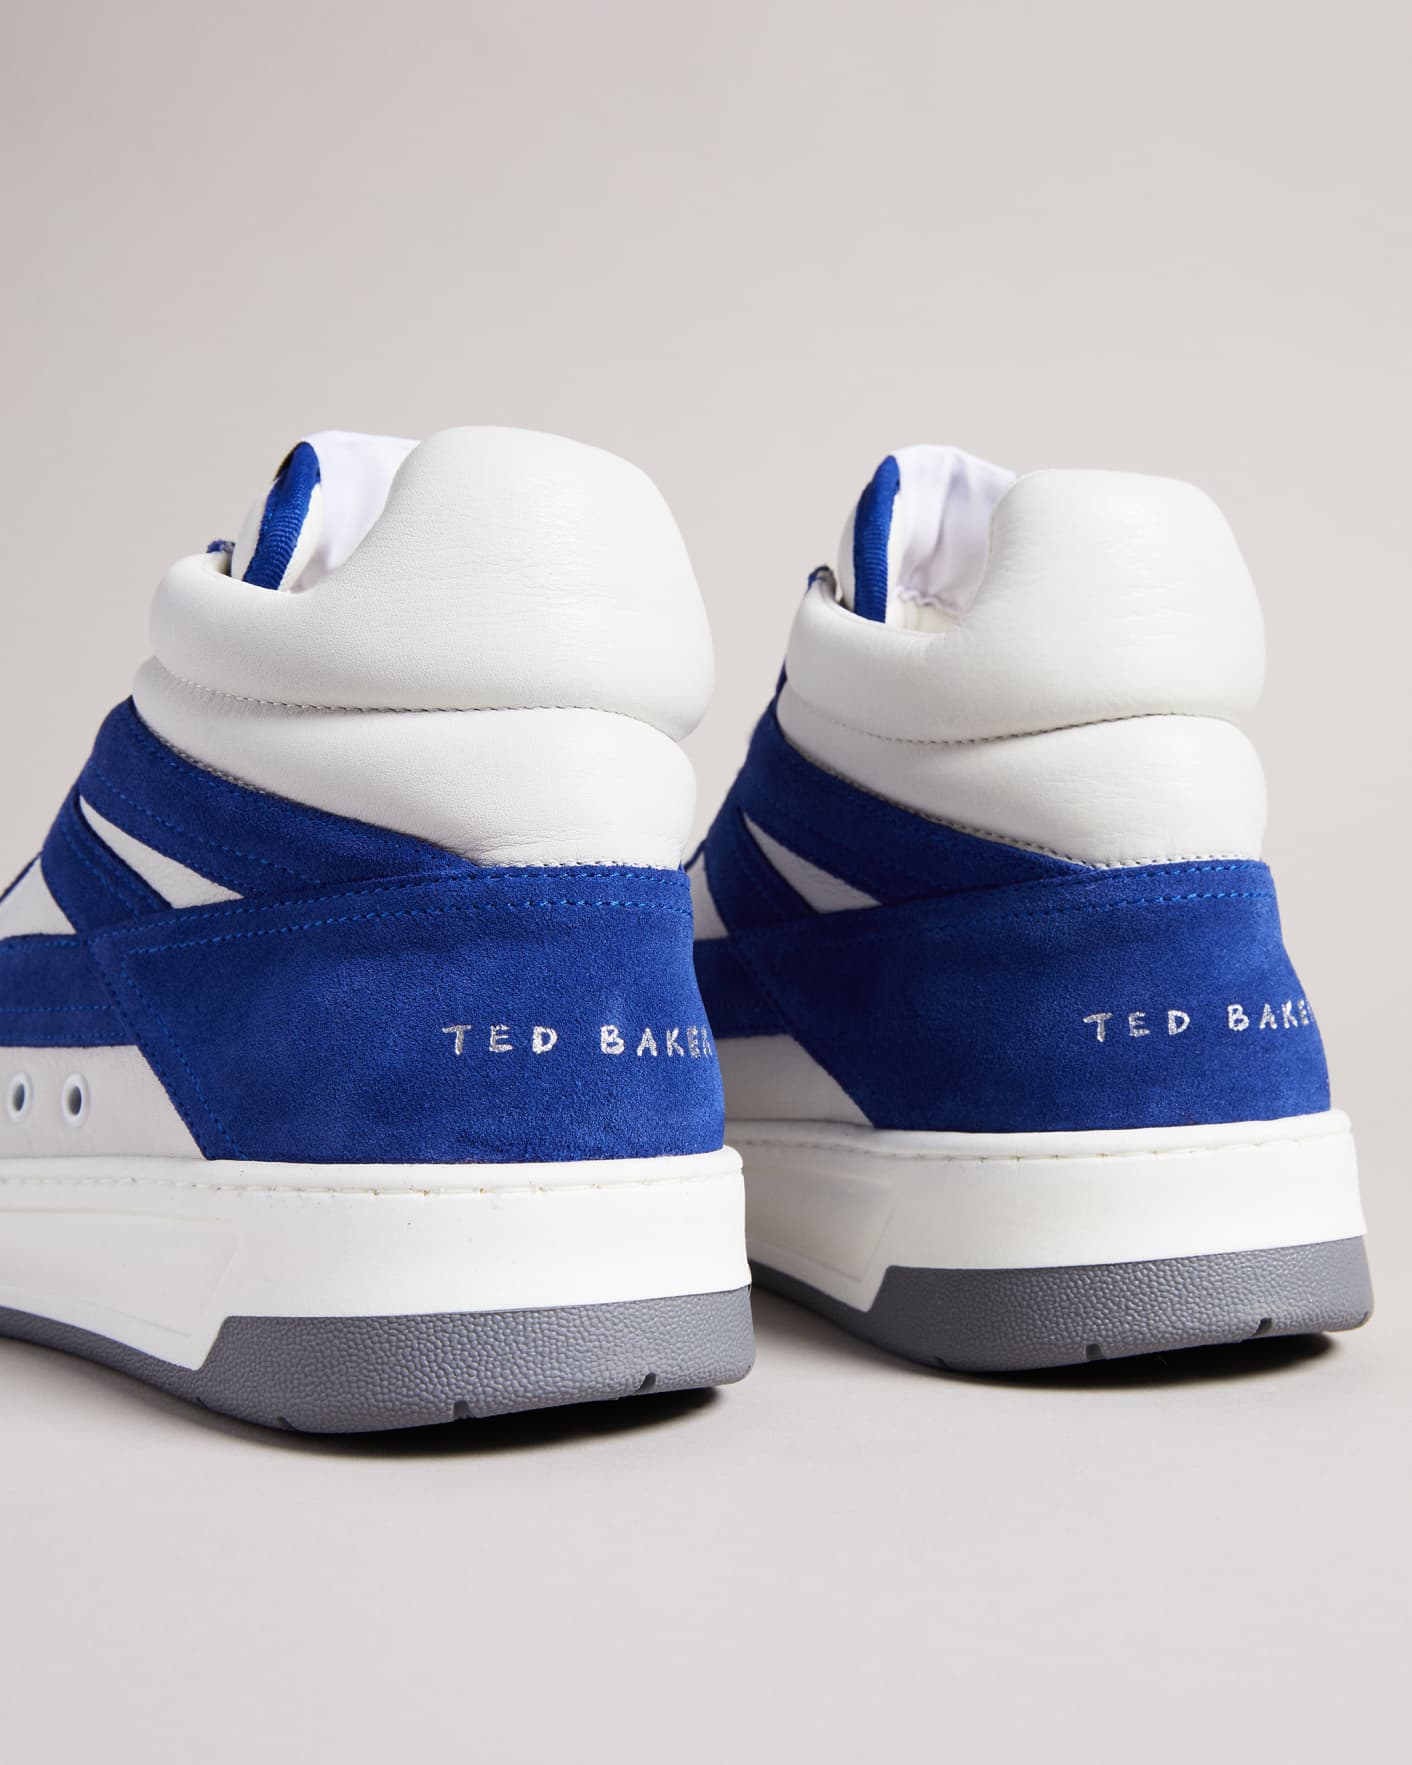 Blue Leather Suede High Top Skate Trainers Ted Baker